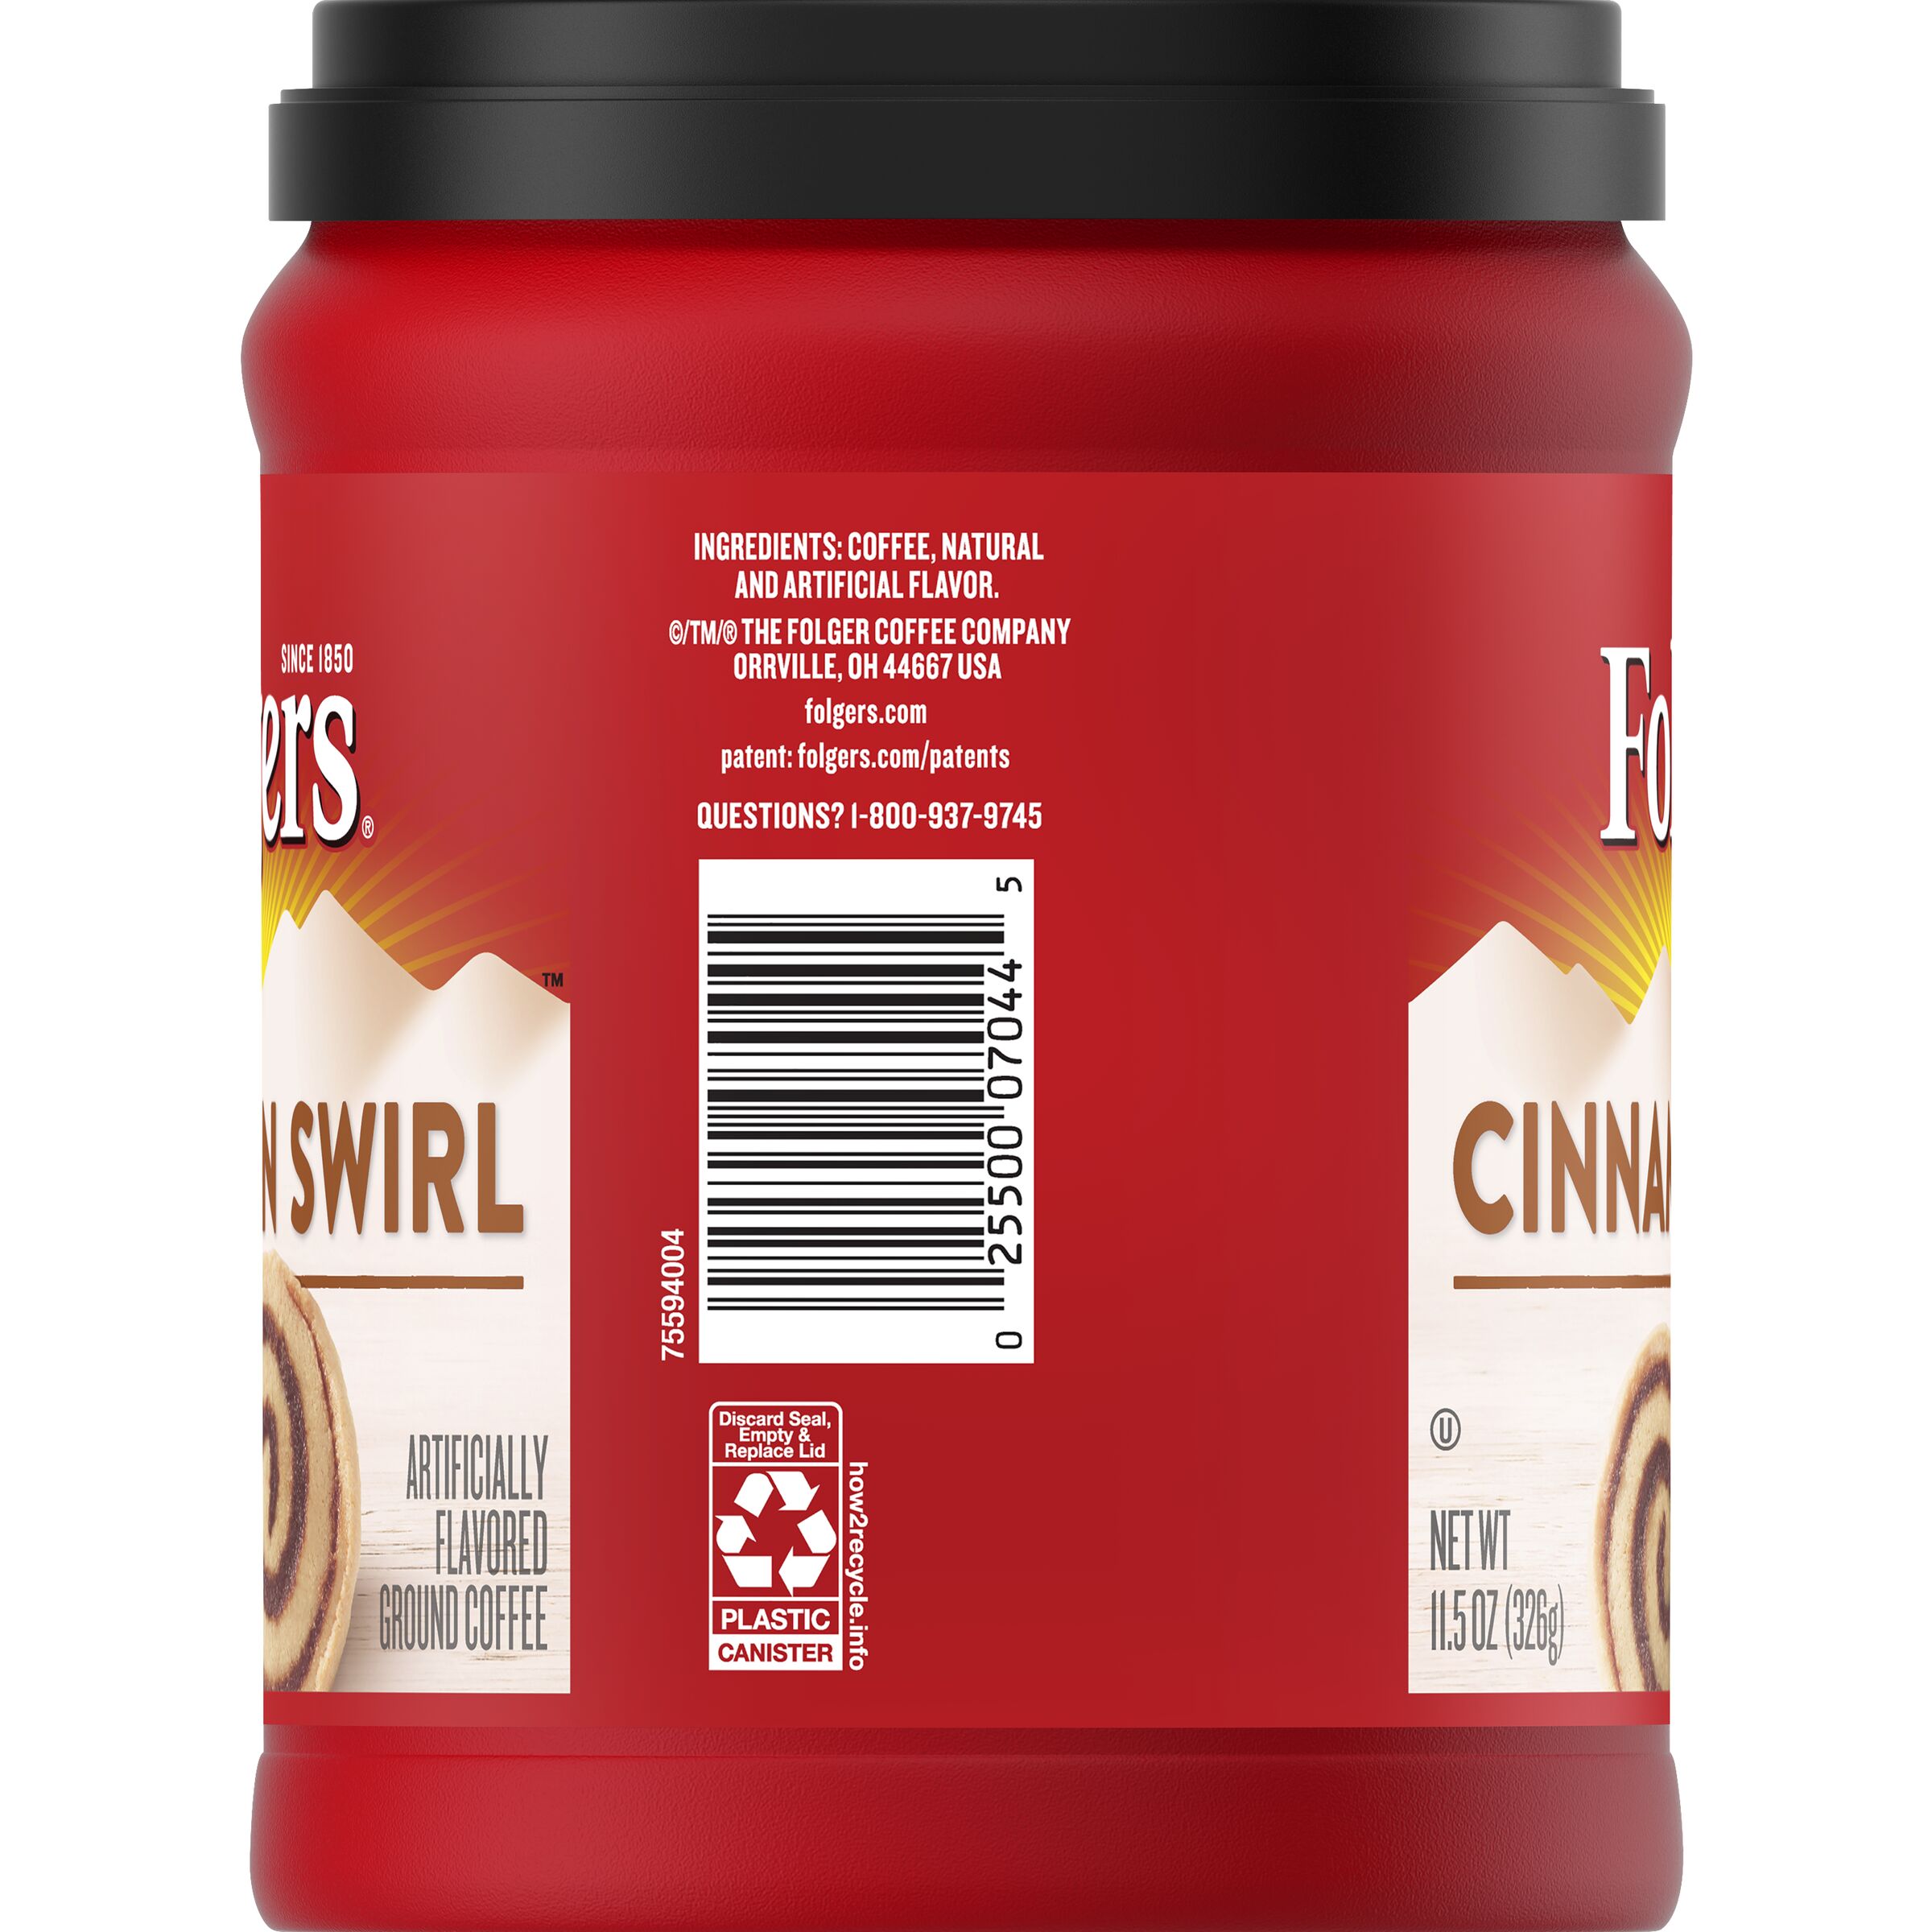 Folgers Cinnamon Swirl Artificially Flavored Ground Coffee, 11.5-Ounce - image 4 of 6